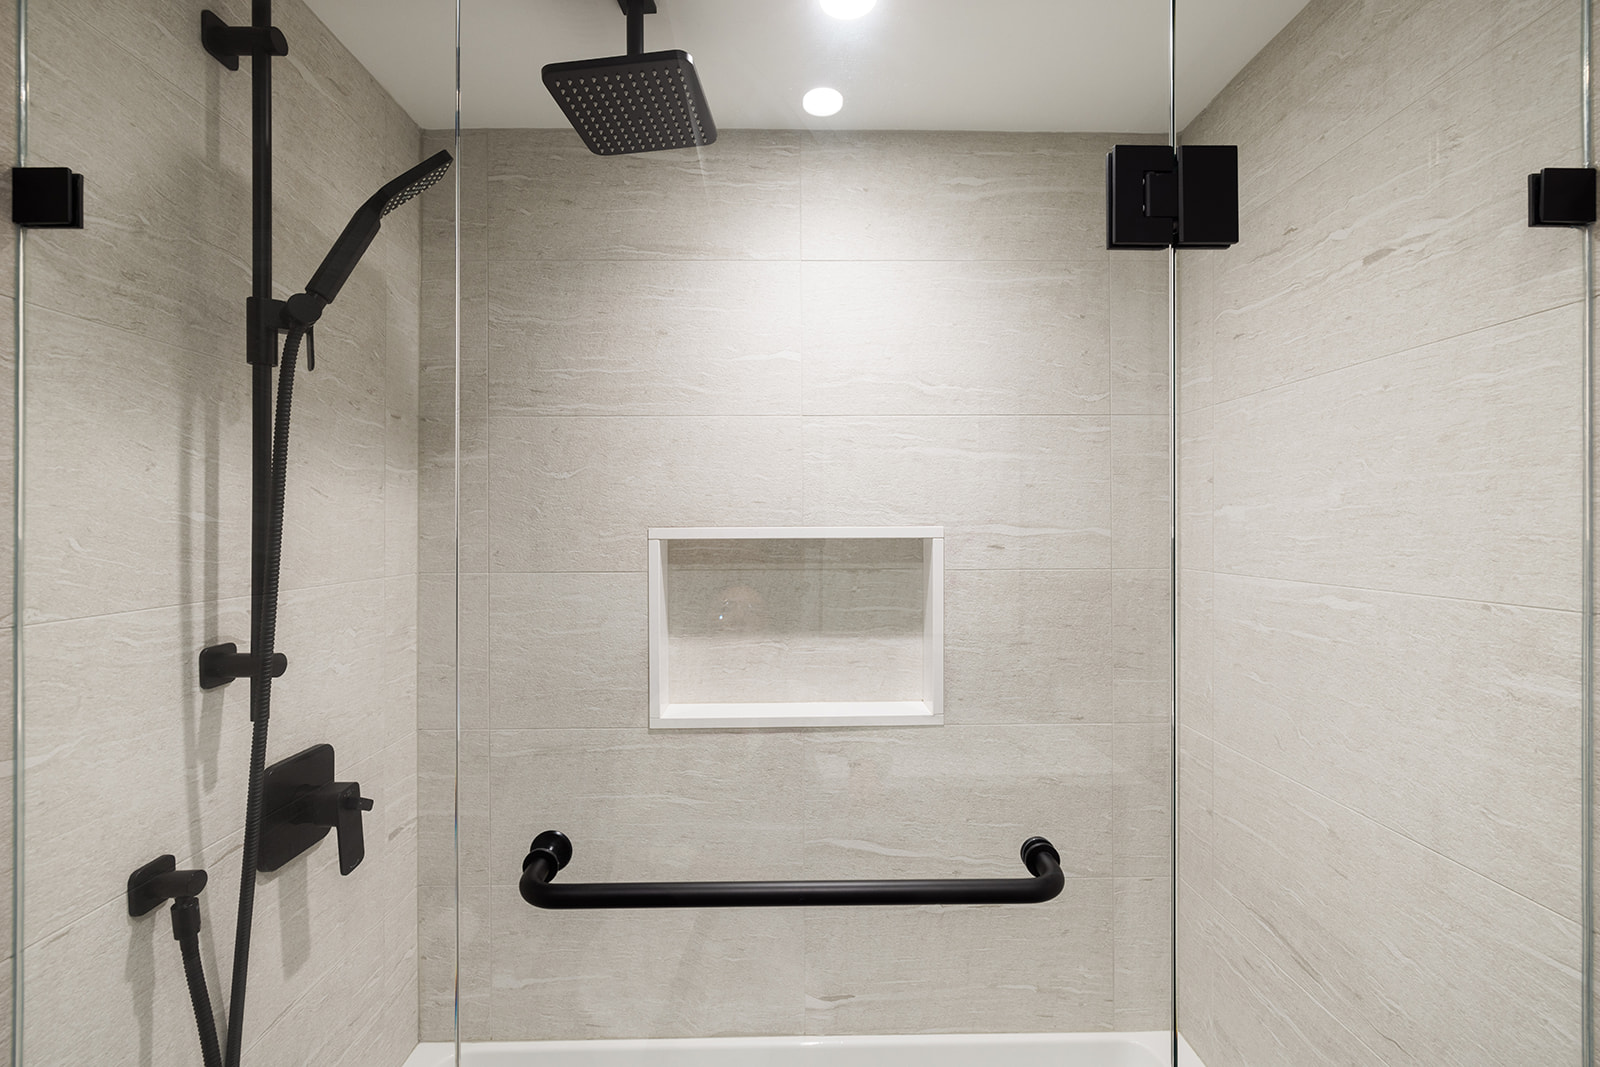 Custom tub and shower combo with built-in shelving and faucet head